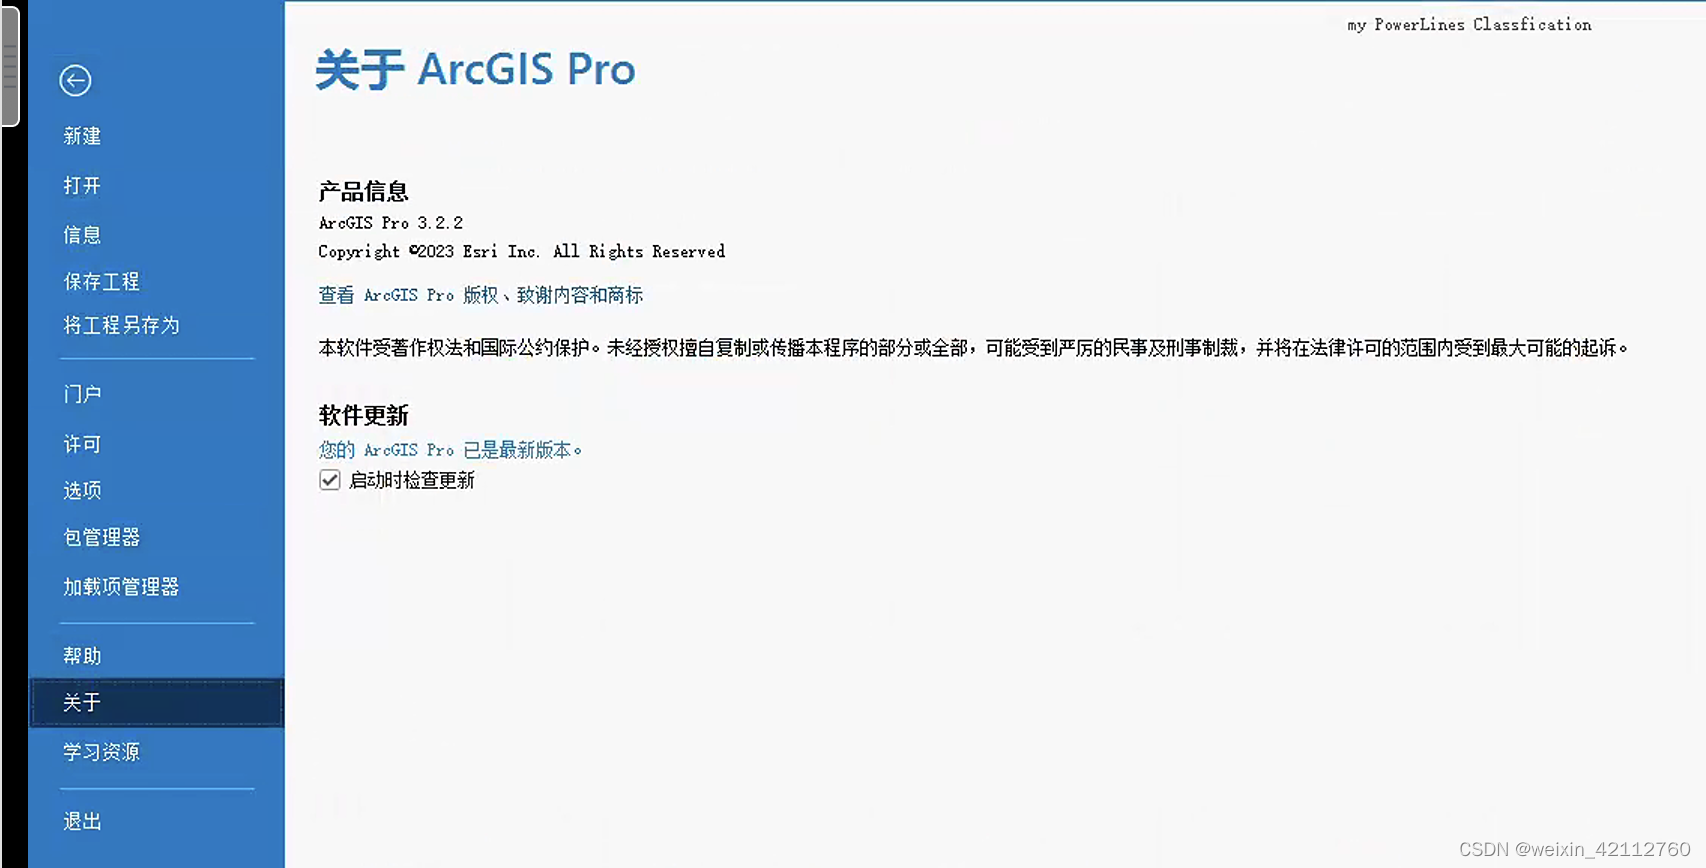 ARCGIS Pro<span style='color:red;'>踩</span><span style='color:red;'>坑</span>及<span style='color:red;'>解决</span>方案